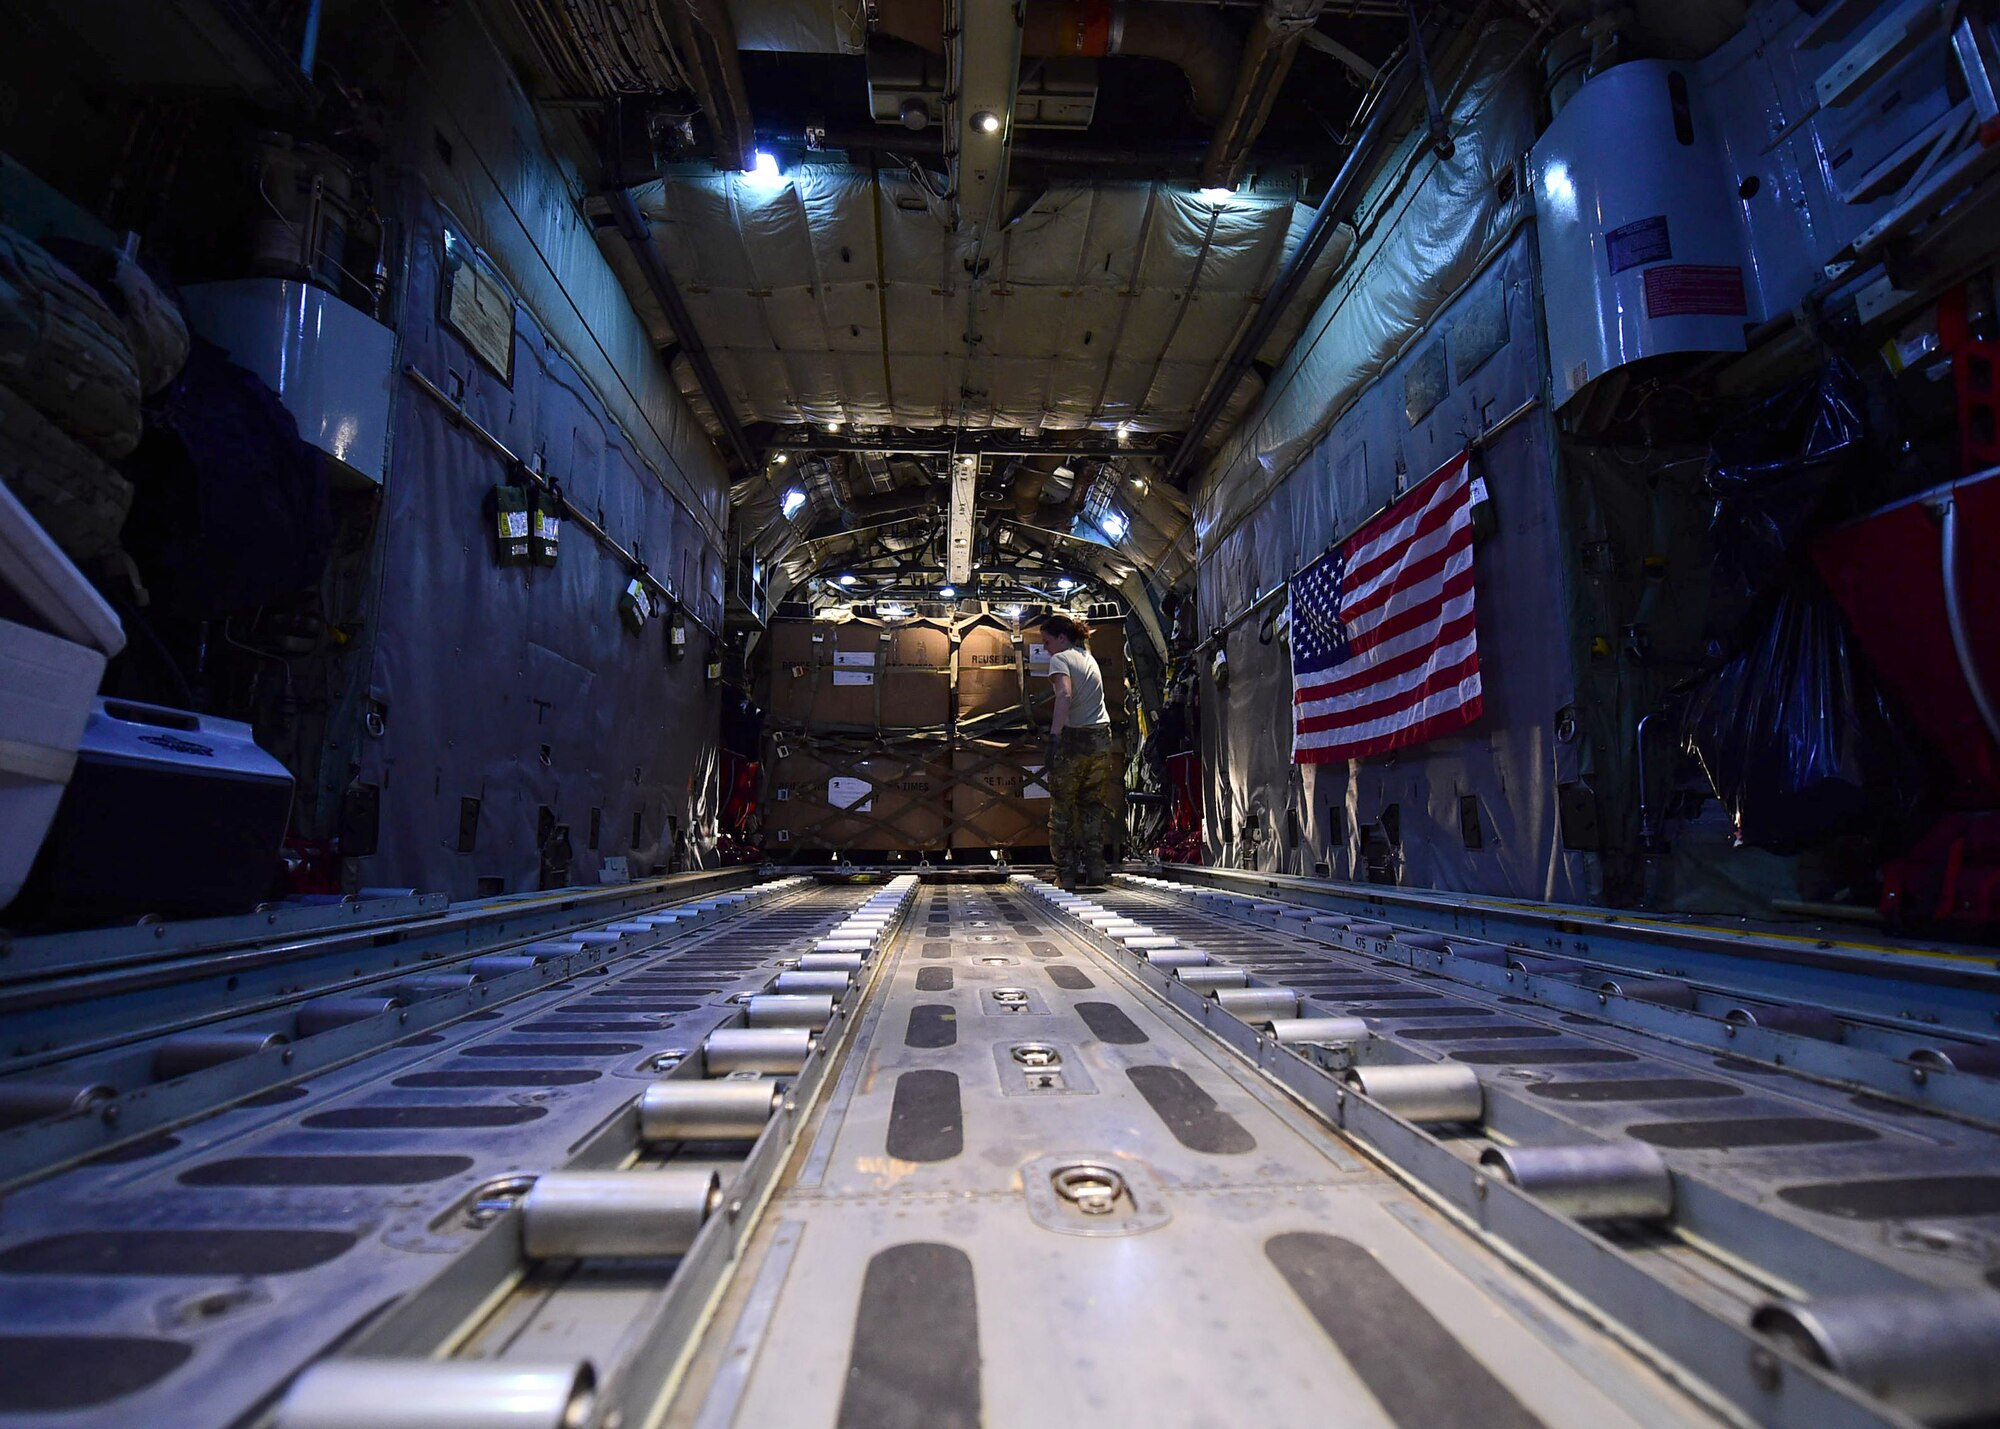 Senior Airman Erin Stewart, 737th Expeditionary Airlift Squadron loadmaster, loads cargo onboard a C-130H Hercules at an undisclosed location in Southwest Asia, Oct. 27, 2015. During their deployment, members of the 192nd Airlift Squadron flew more than 600 airlift missions. (U.S. Air Force photo by Staff Sgt. Jerilyn Quintanilla)